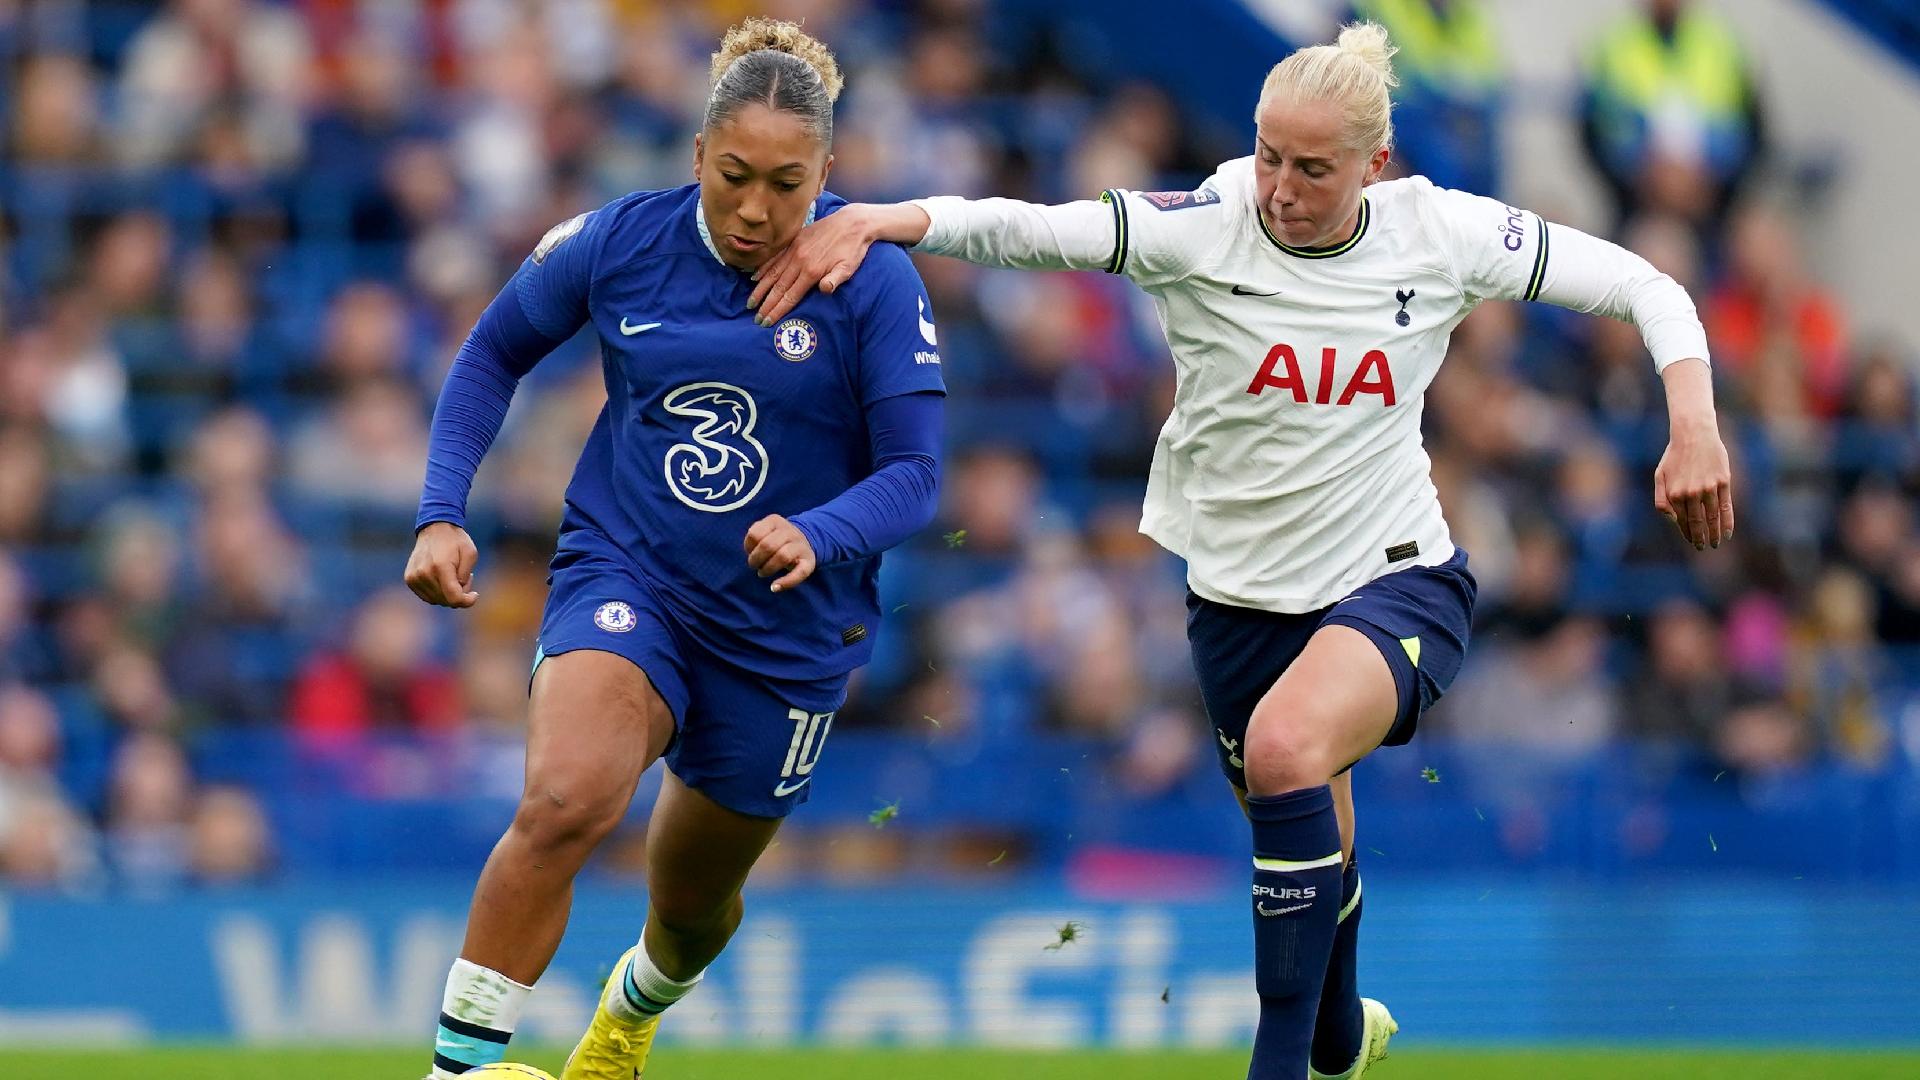 Changes on and off the pitch as a new era approaches for Women’s Super League